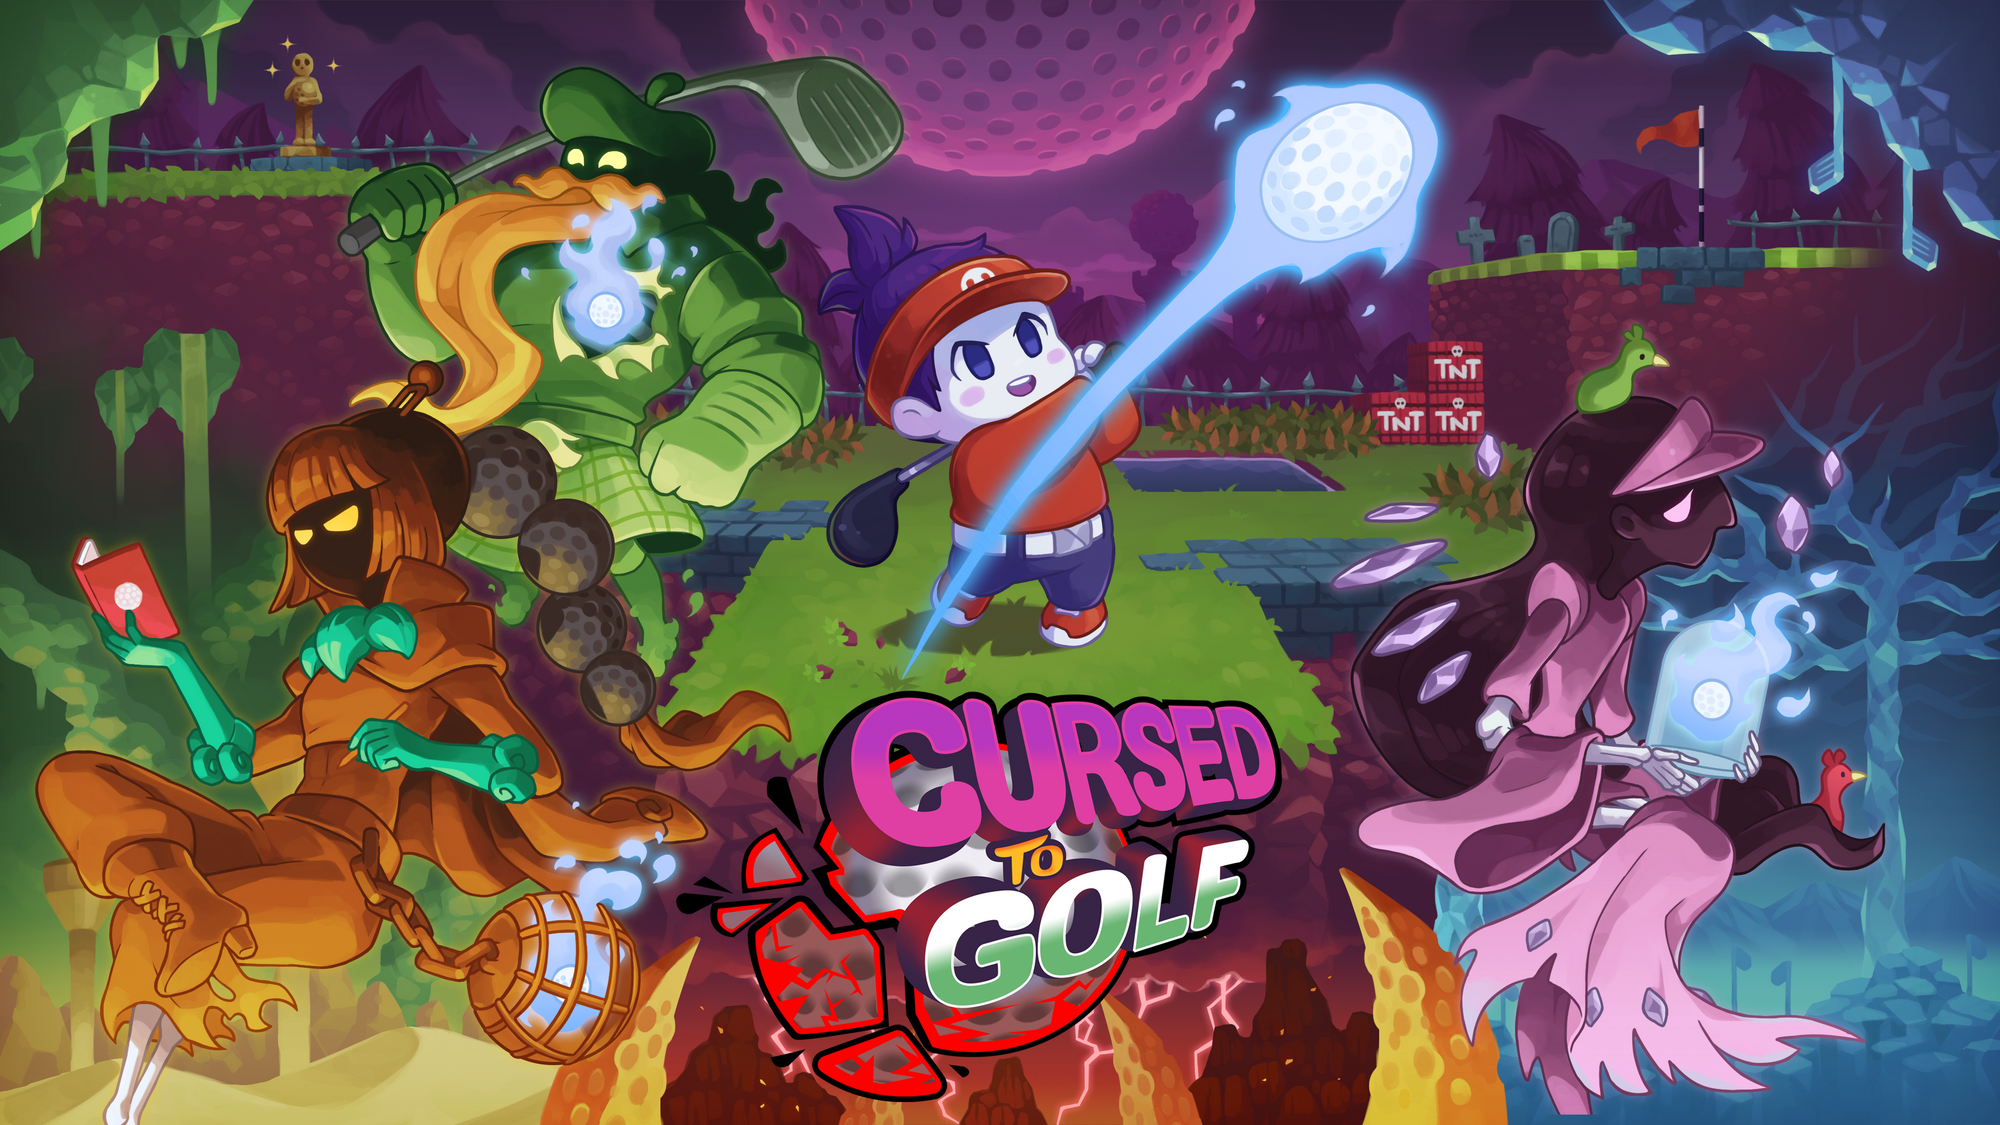 Cursed to Golf is a Hole-In-One